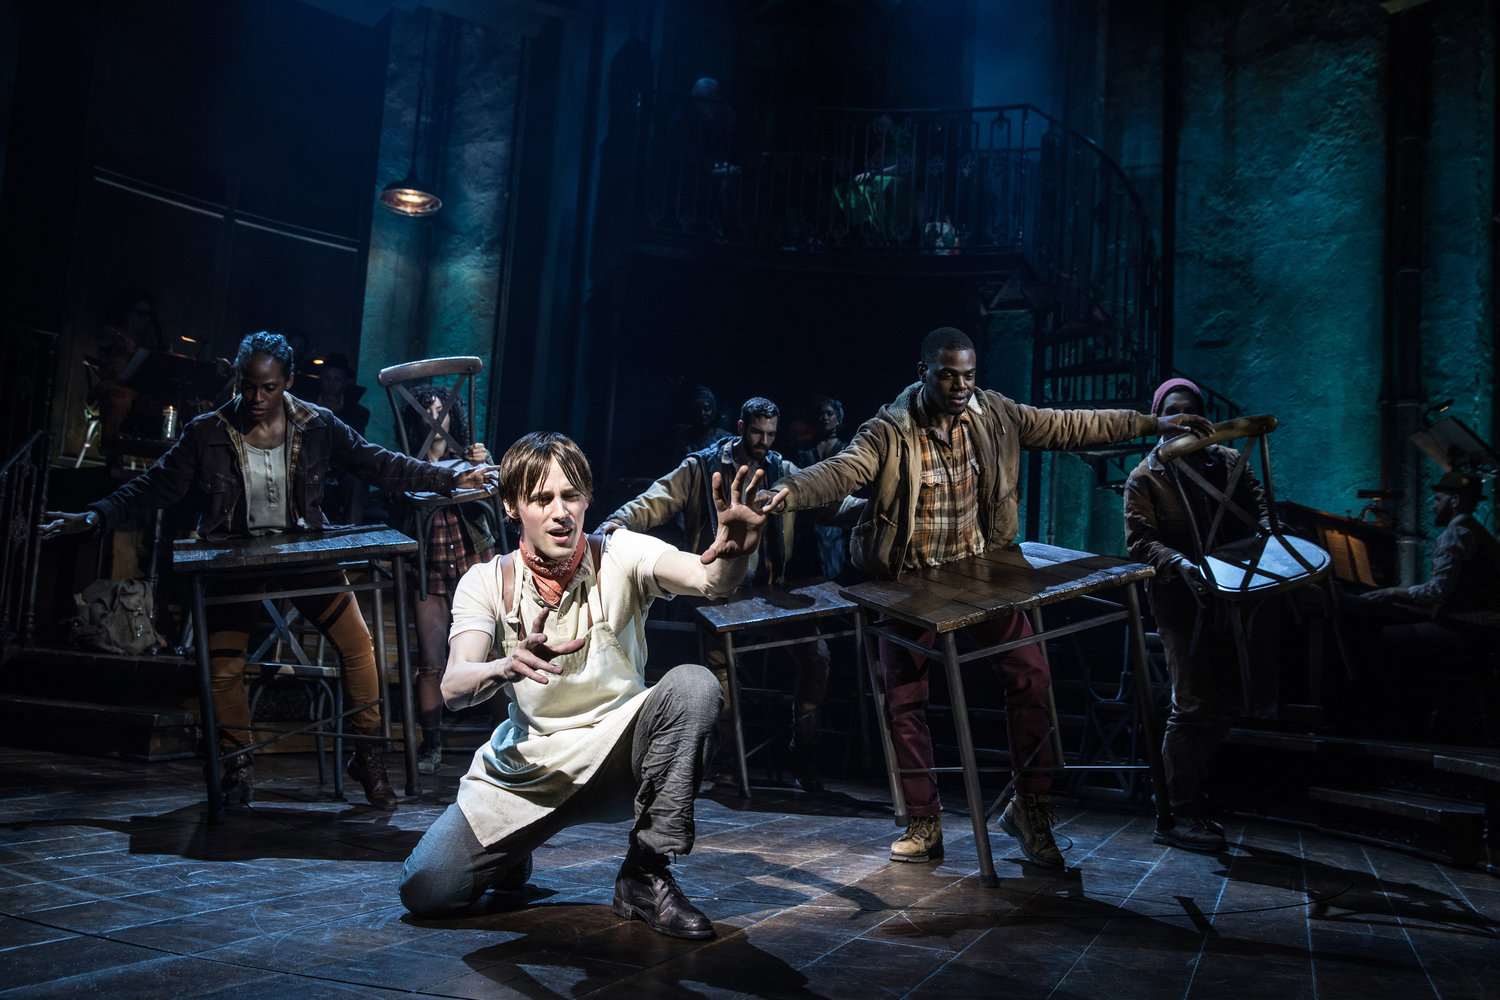 FACE OF INNOCENCE—Reeve Carney as Orpheus and the Broadway cast of “Hadestown.”